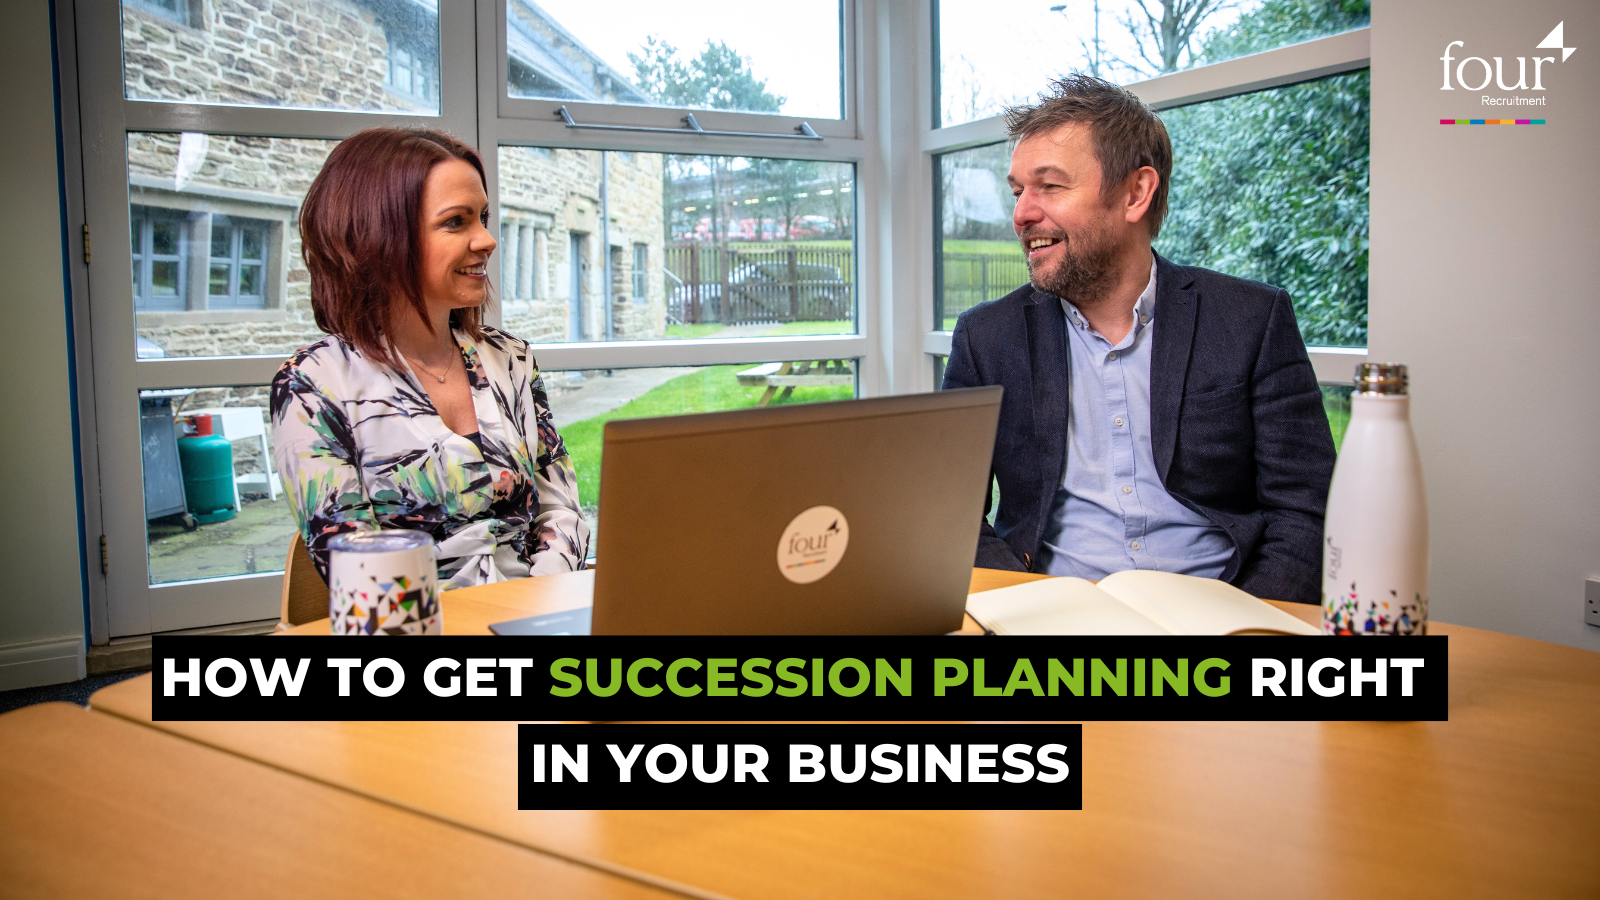 How to Get Succession Planning Right in Your Business